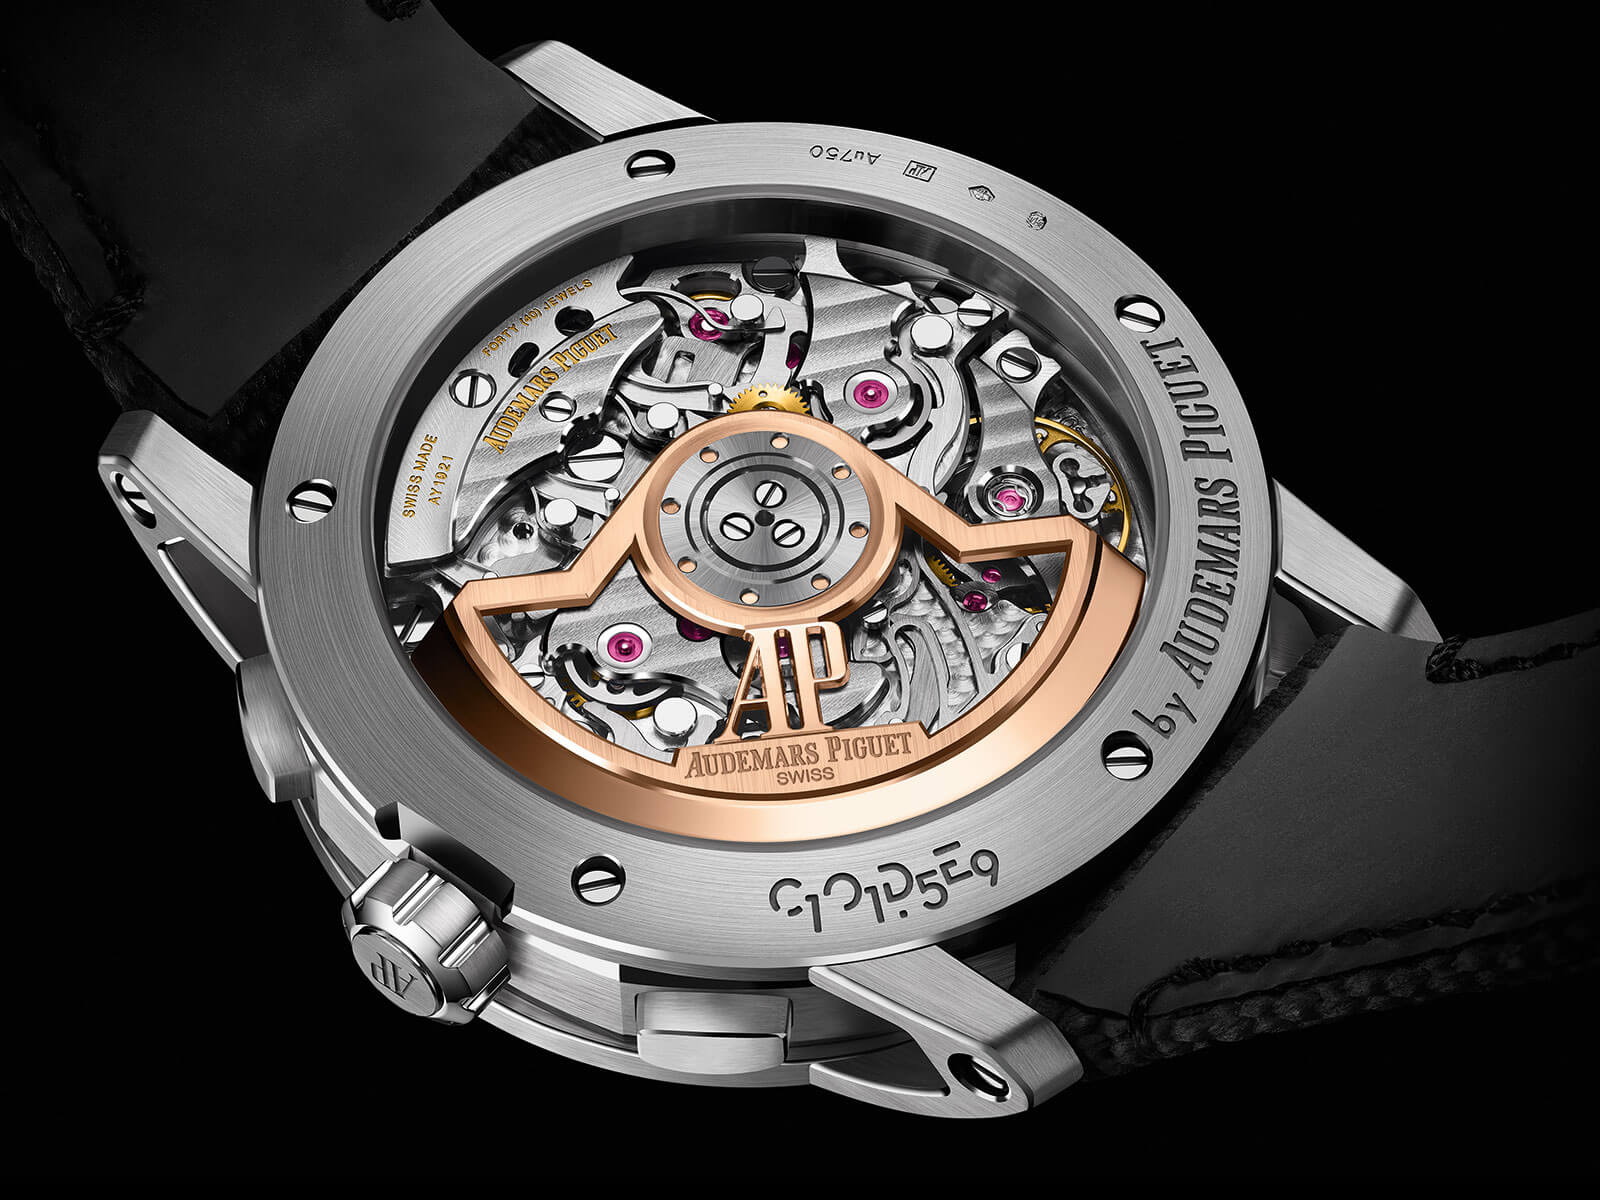 Code 11.59 by Audemars Piguet 26393BC.OO.A002KB.01 Glare-proofed Sapphire Crystal Case Back